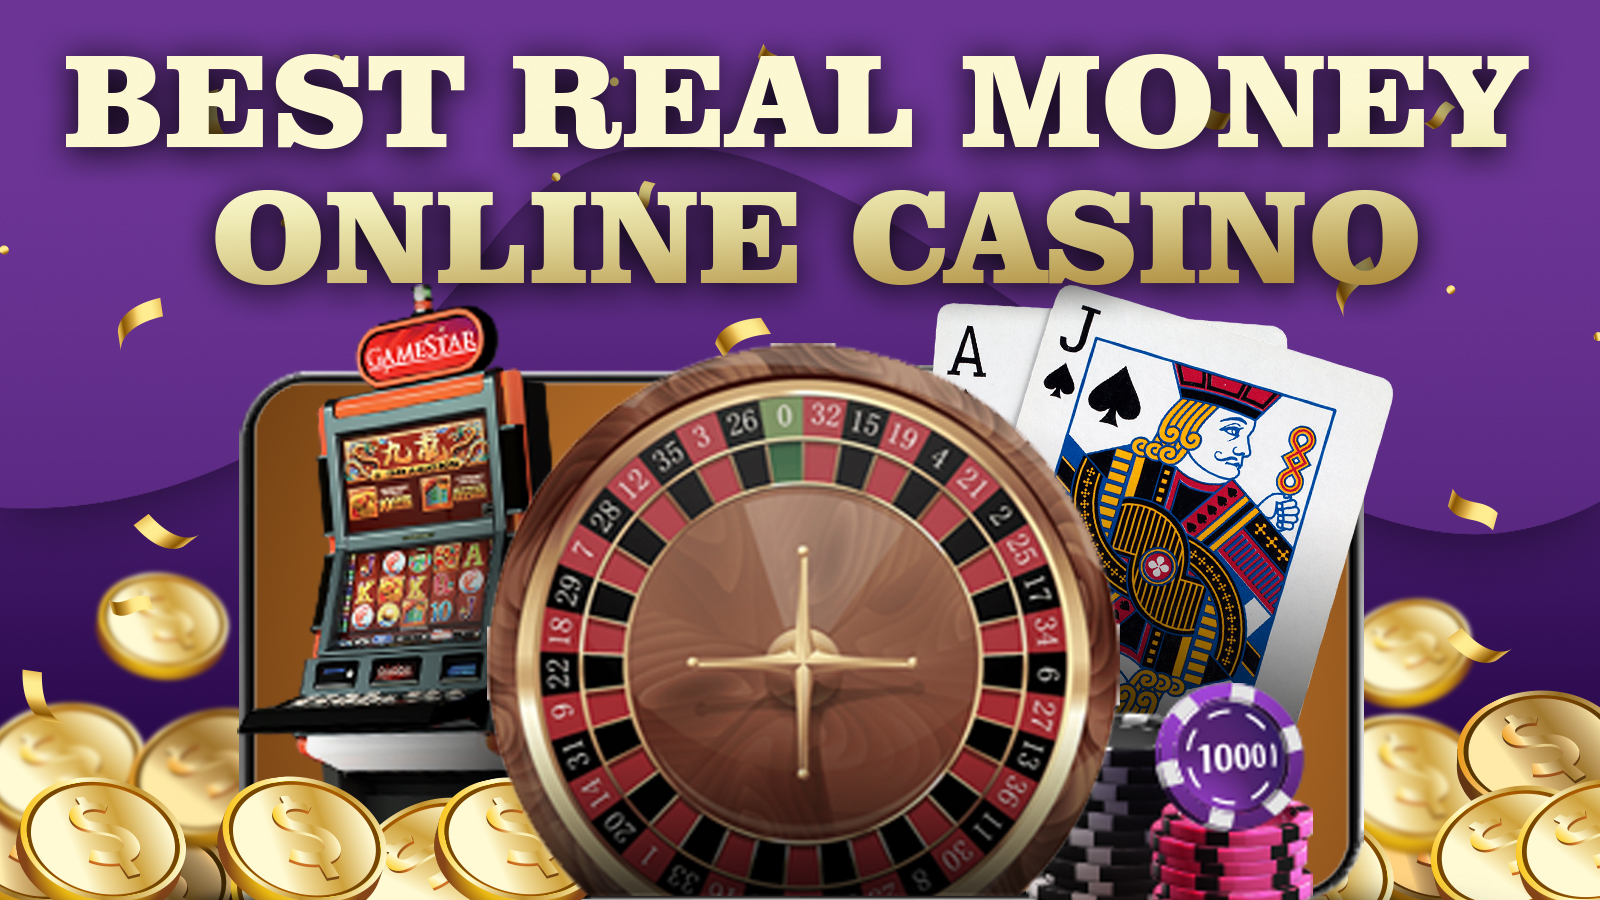 Best Online Gambling Sites Rated for Security, Casino Bonuses & Games